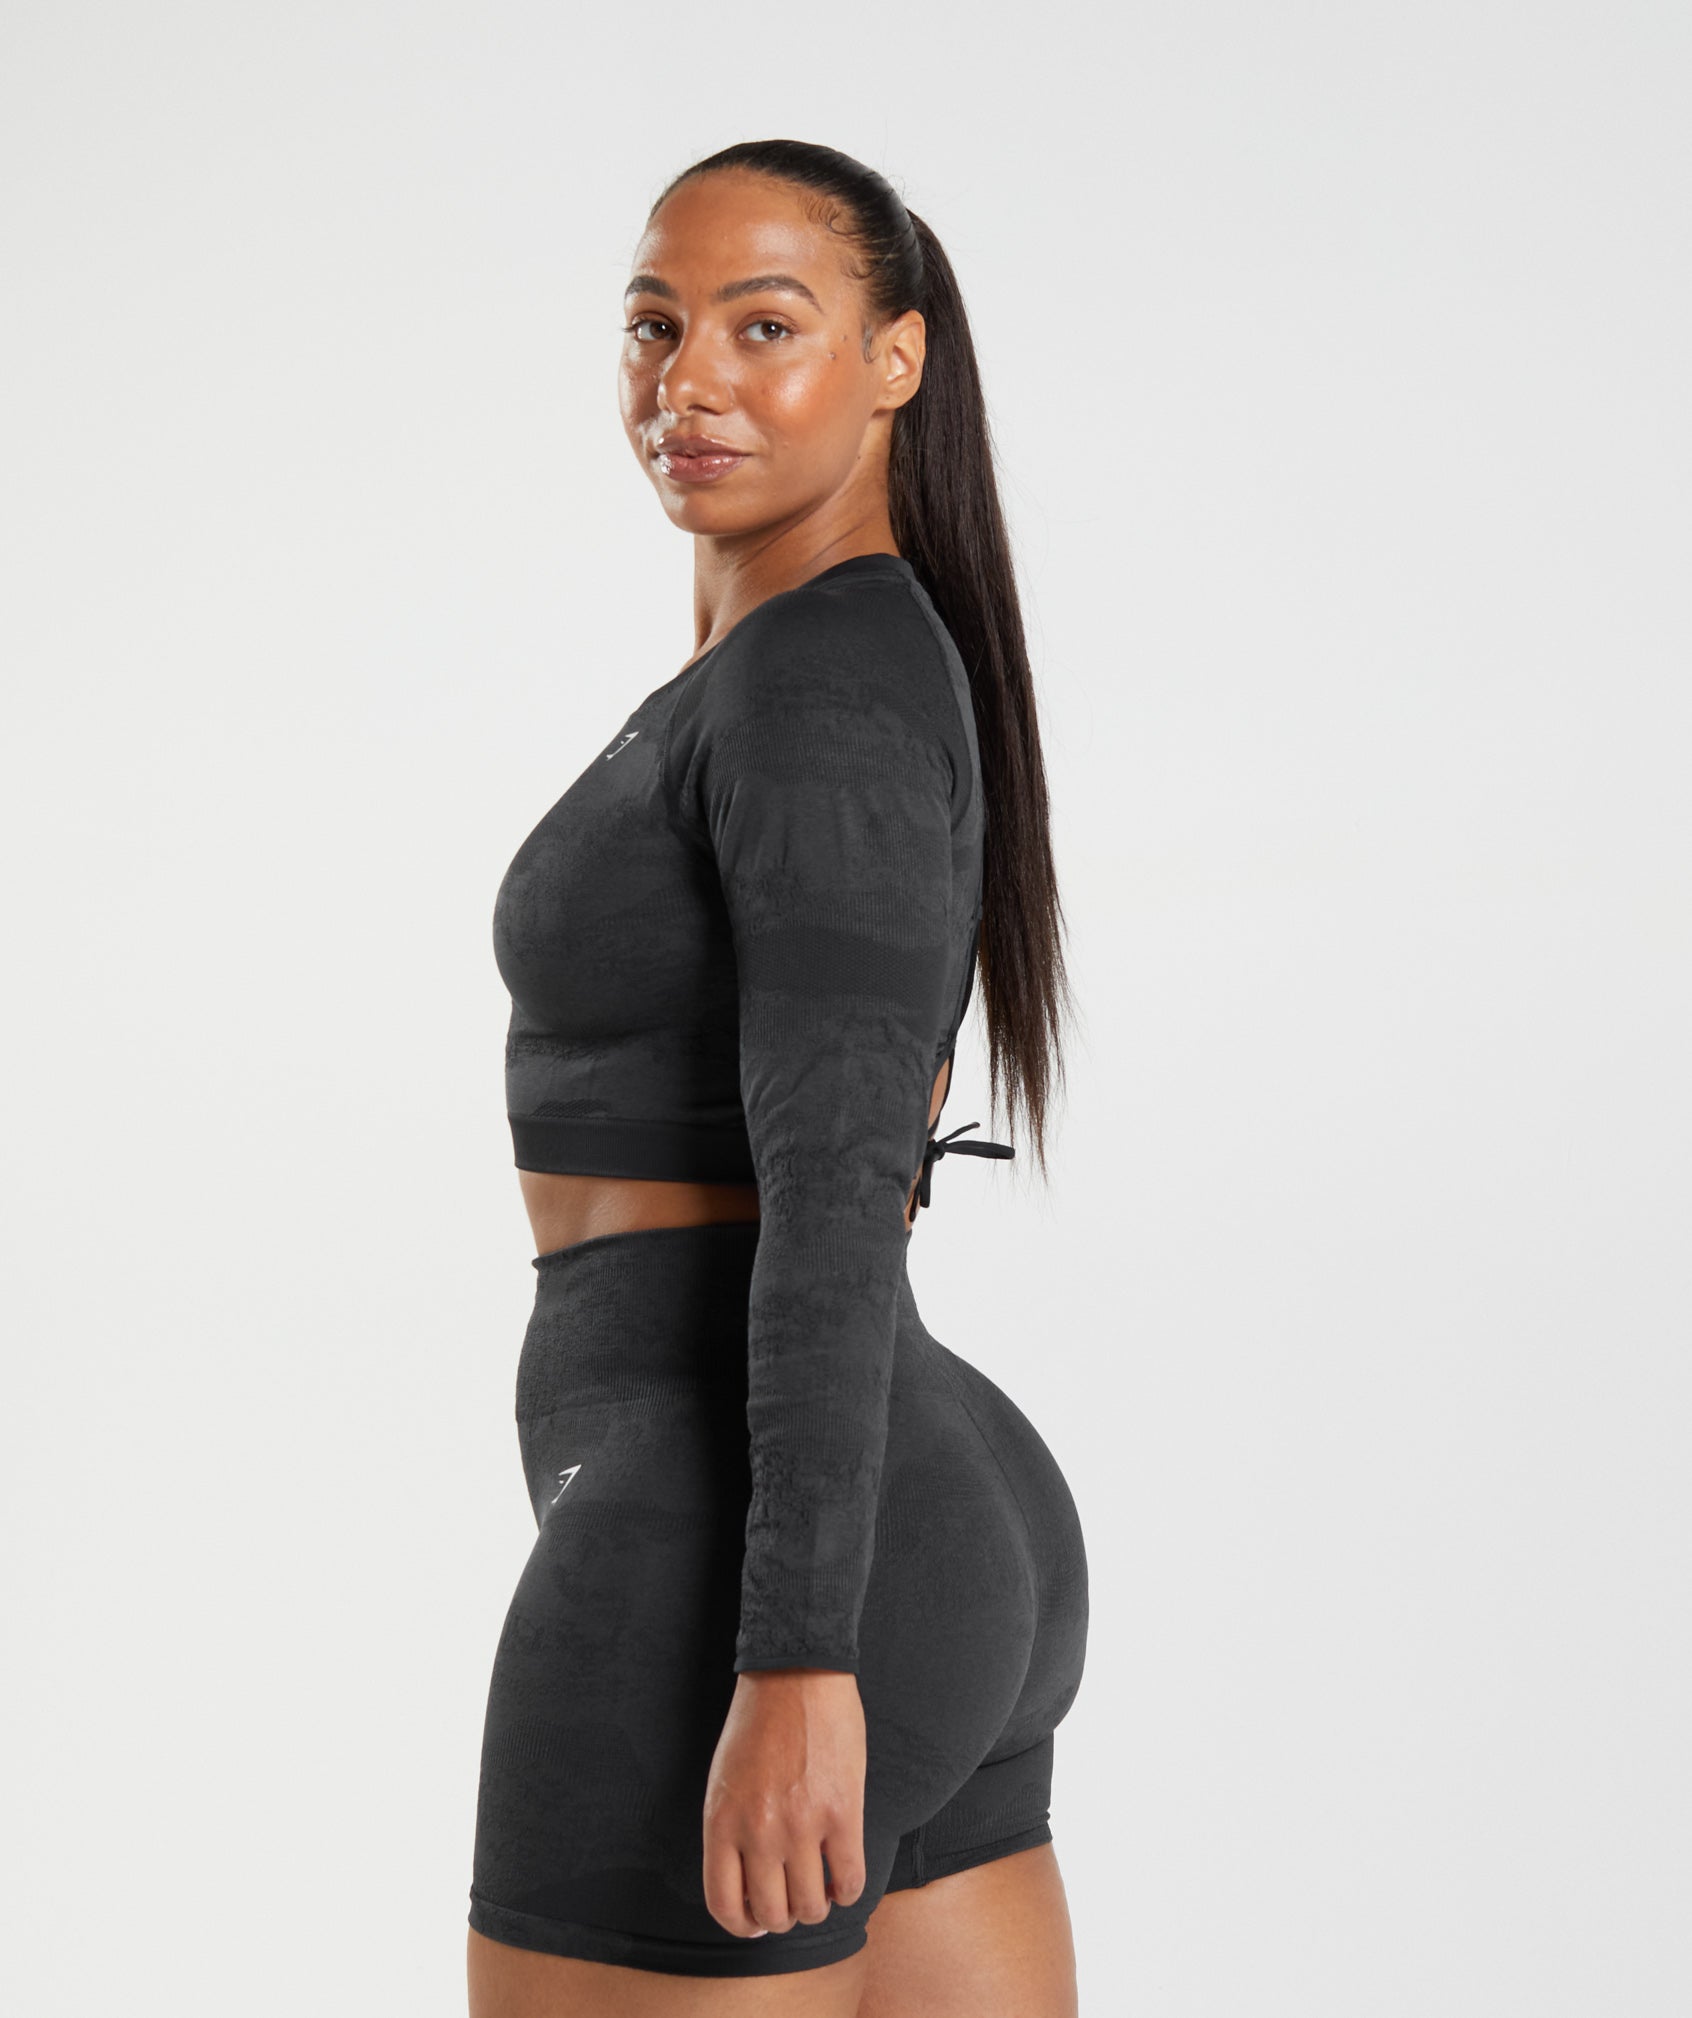 Adapt Camo Seamless Lace Up Back Top in Black/Onyx Grey - view 3